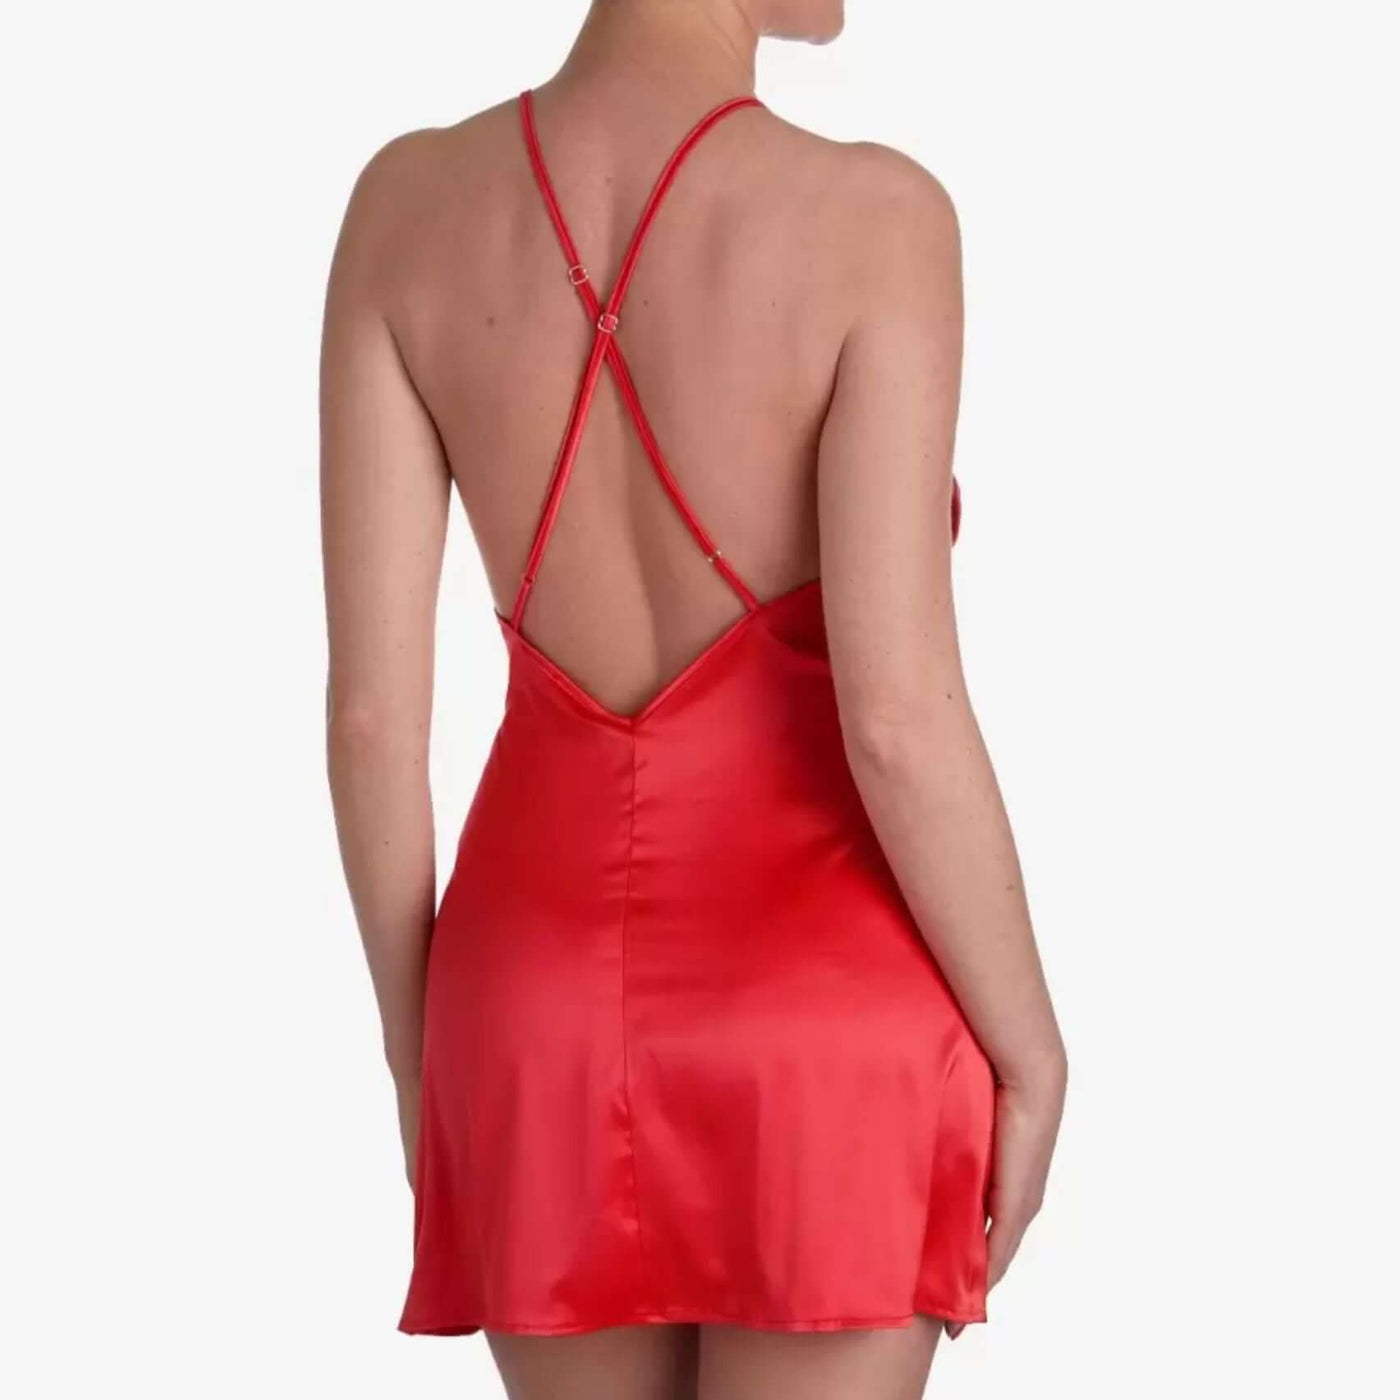 Ajour Gelato Satin Chemise in Red K4A-Loungewear-Ajour-Red-XSmall-Anna Bella Fine Lingerie, Reveal Your Most Gorgeous Self!